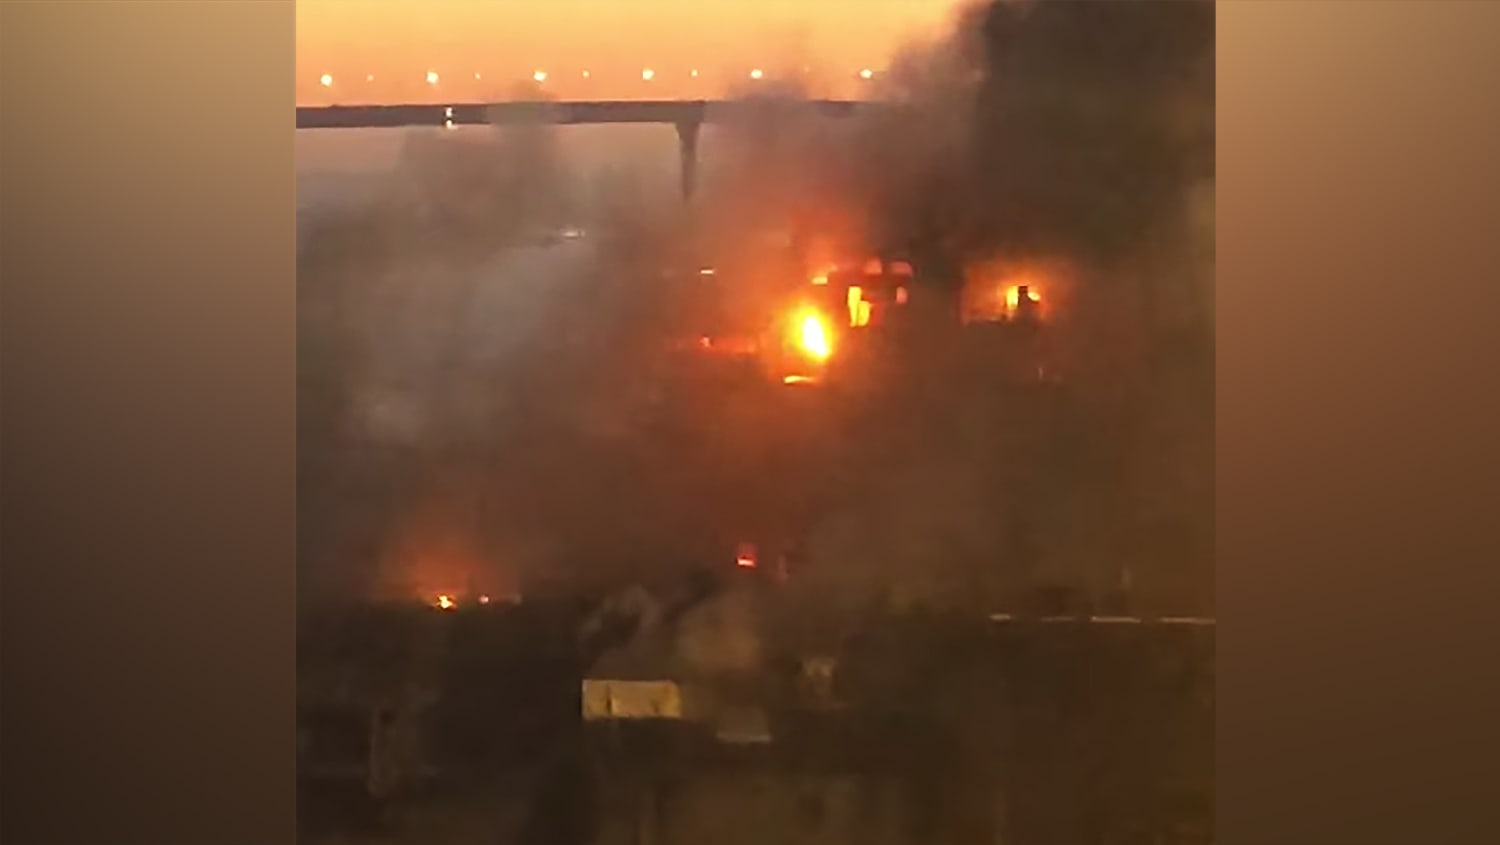 USS Bonhomme Richard's Bridge Engulfed In Flames As Fire Rages Into The Night (Updated)